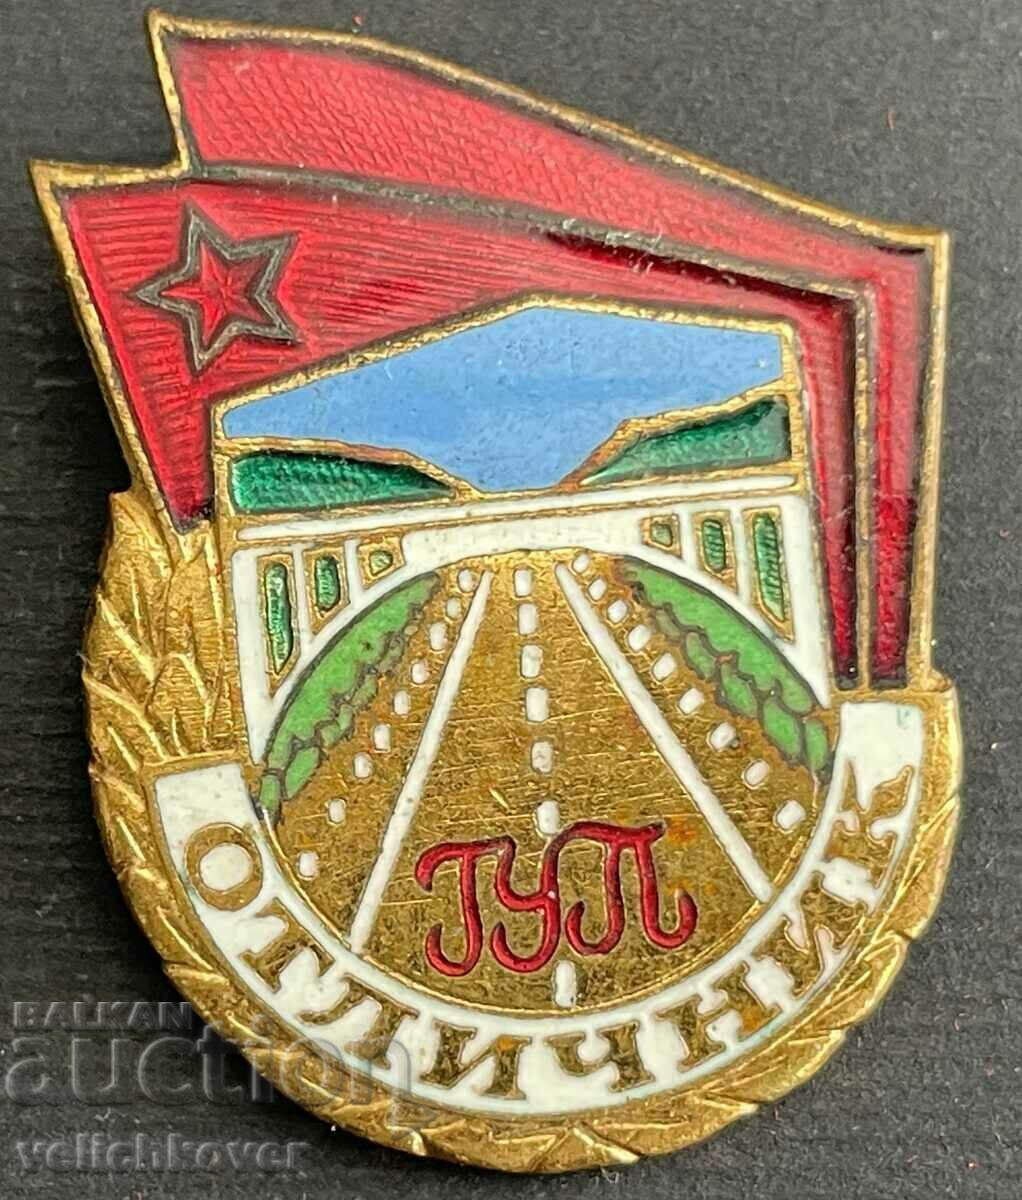 35107 Bulgaria Excellent student of the General Directorate of Roads